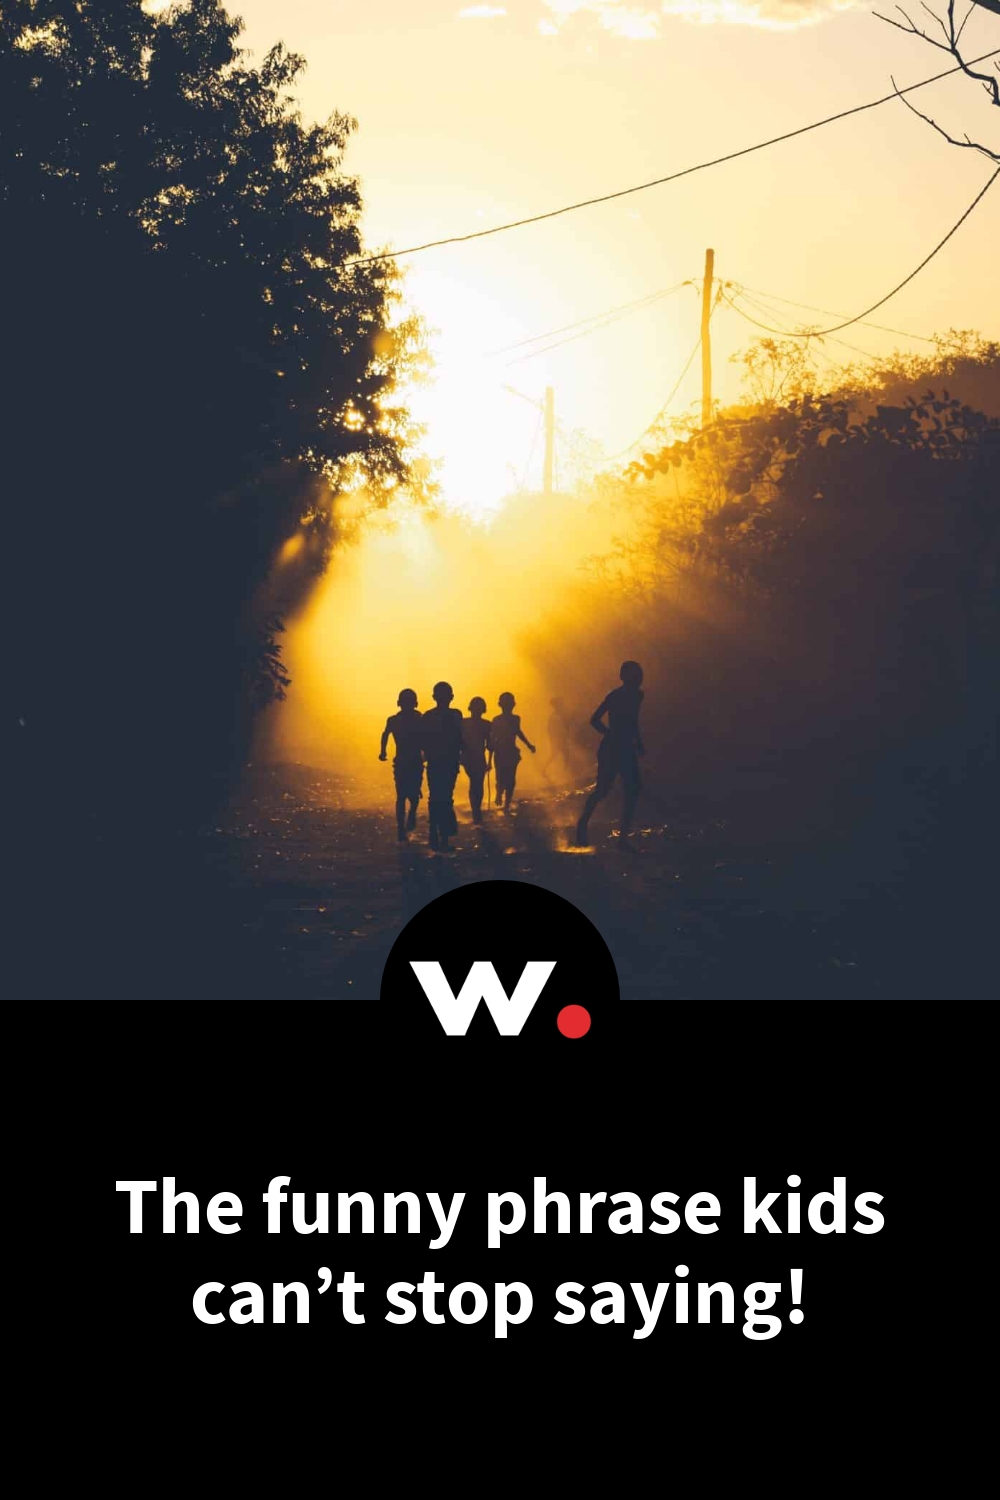 The funny phrase kids can’t stop saying!